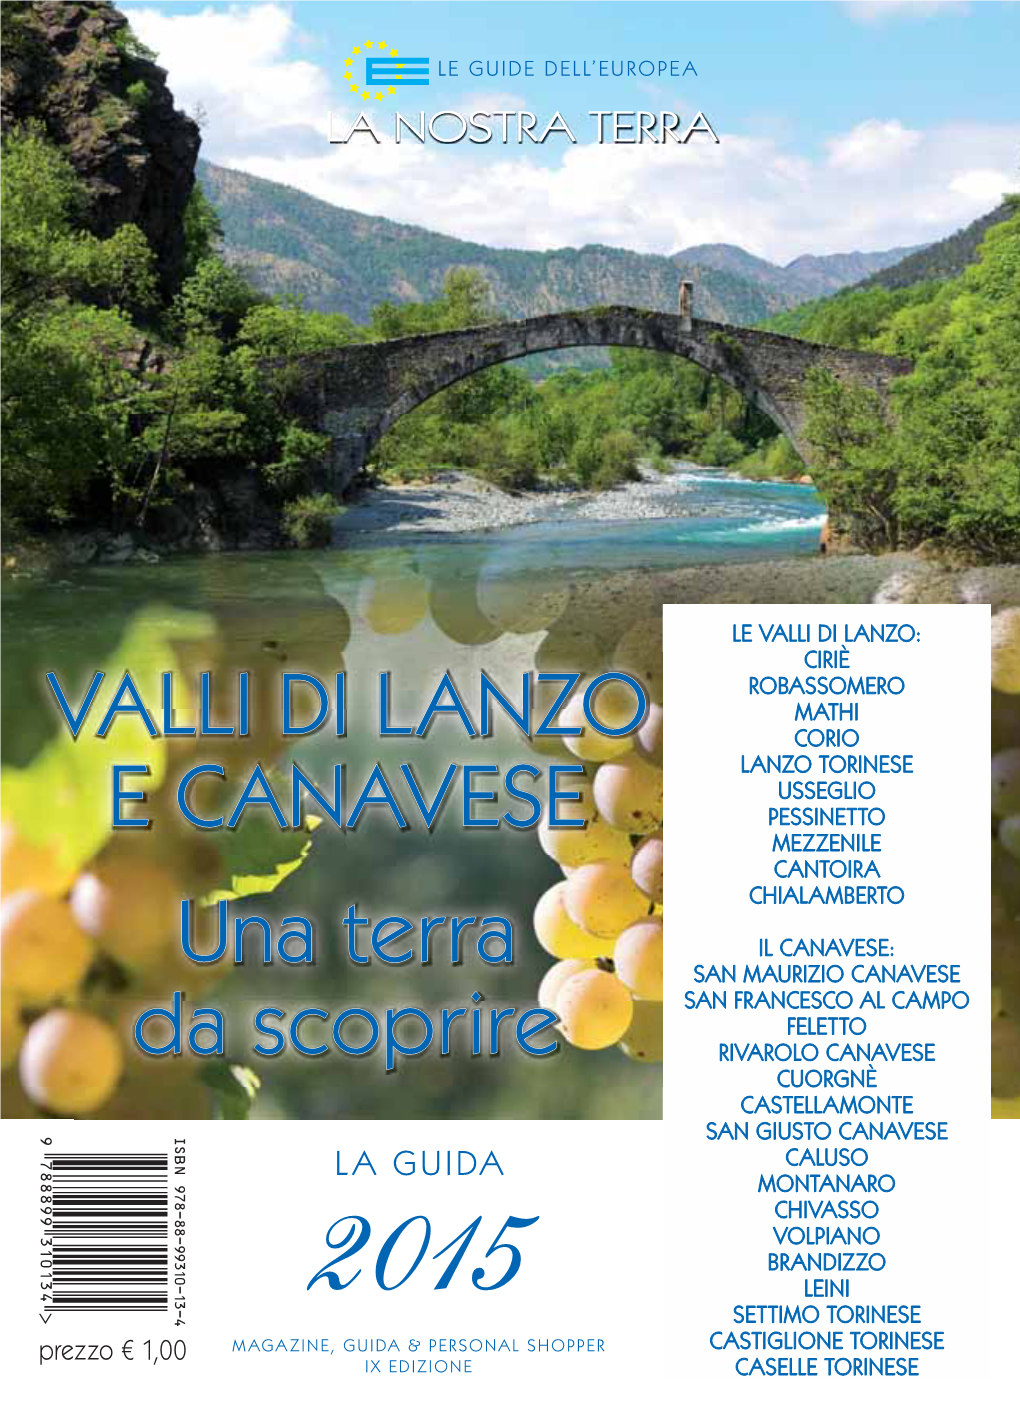 BASSO CANAVESE VALLI DI LANZO 2015.Indd